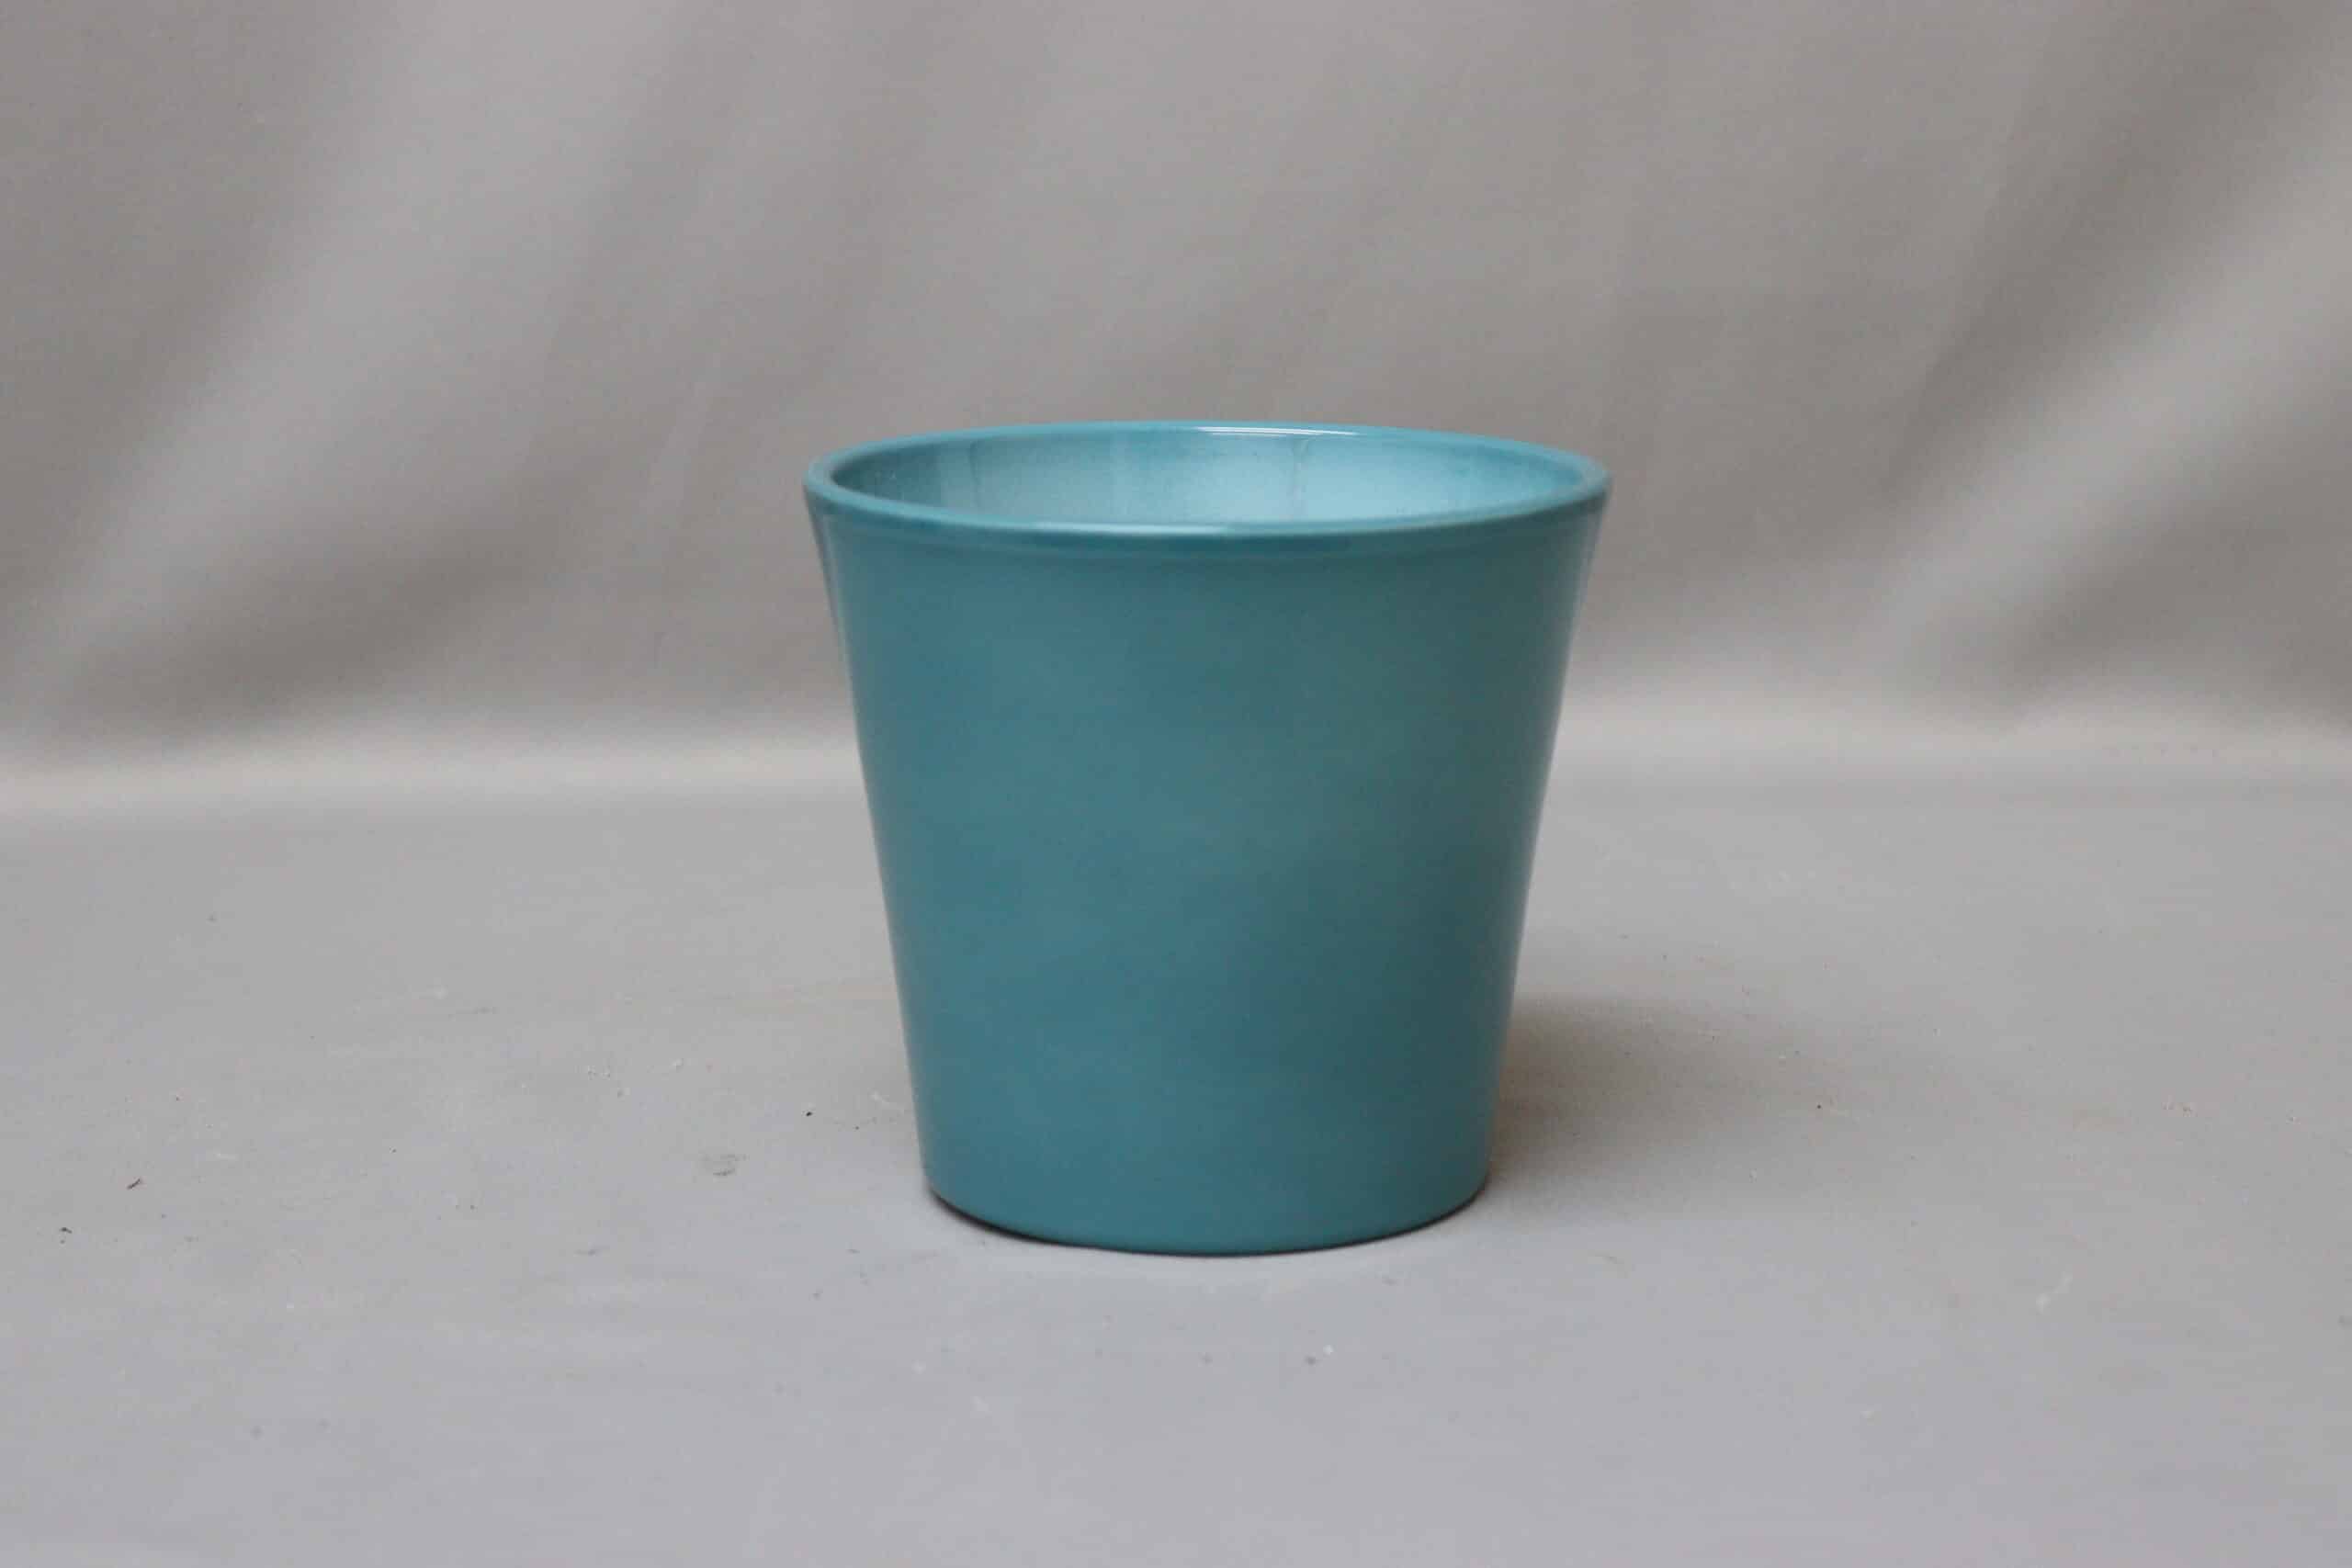 Medium-sized smooth turquoise blue pot cover for potted plants.